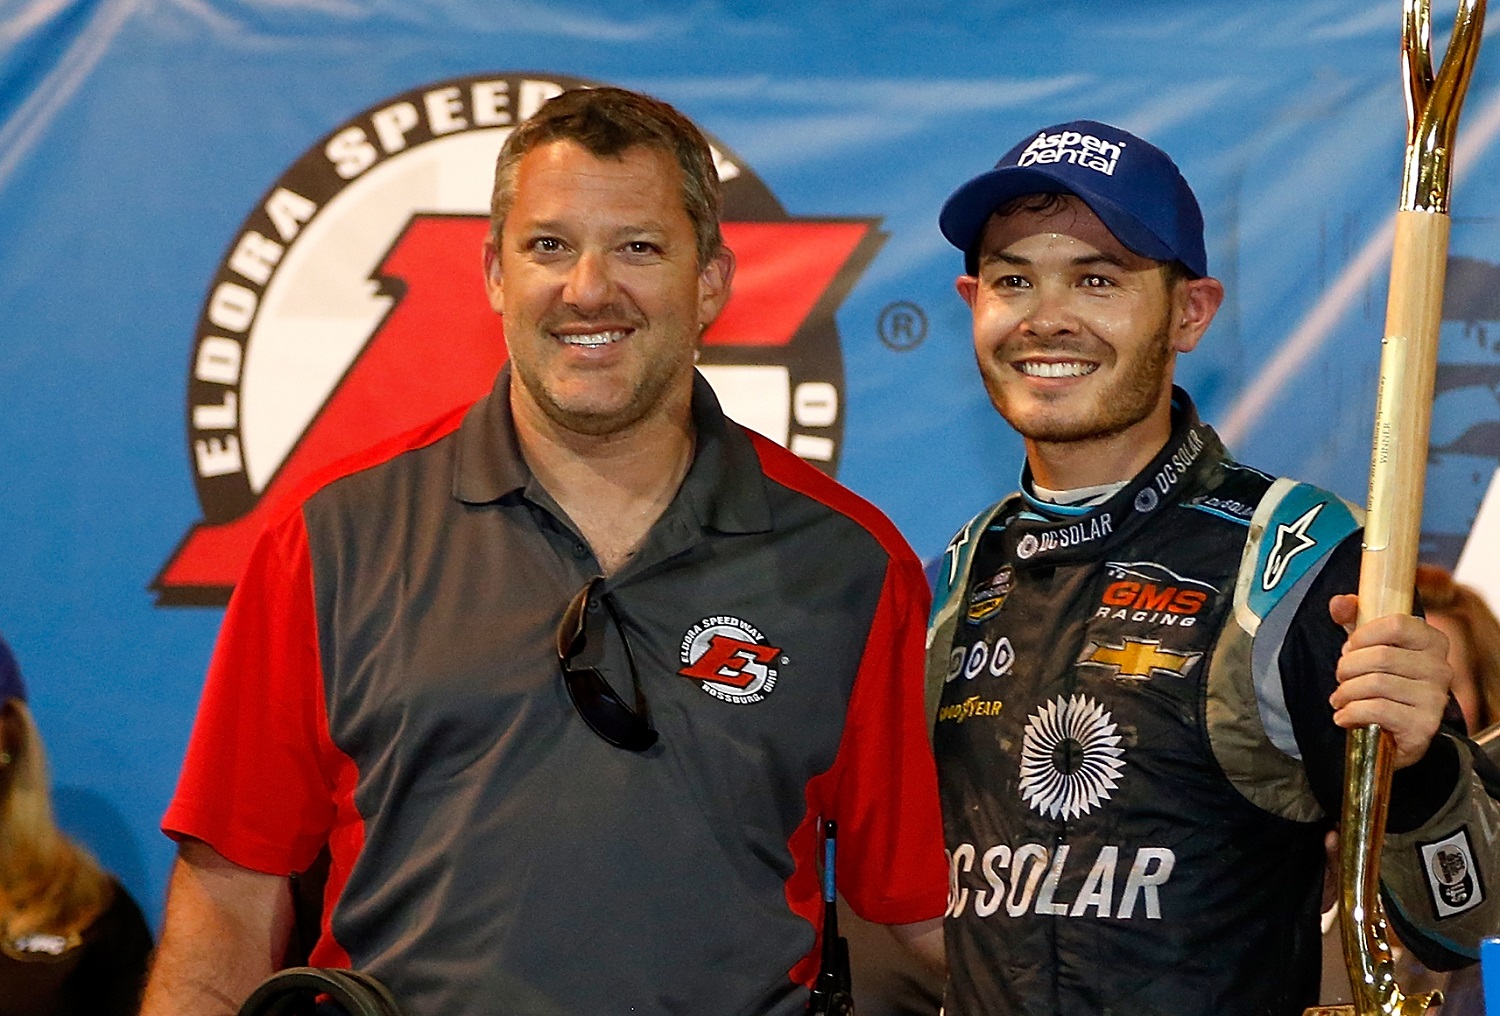 Kyle Larson poses with Tony Stewart after winning the NASCAR Camping World Series Aspen Dental Eldora Dirt Derby 150 on July 20, 2016.